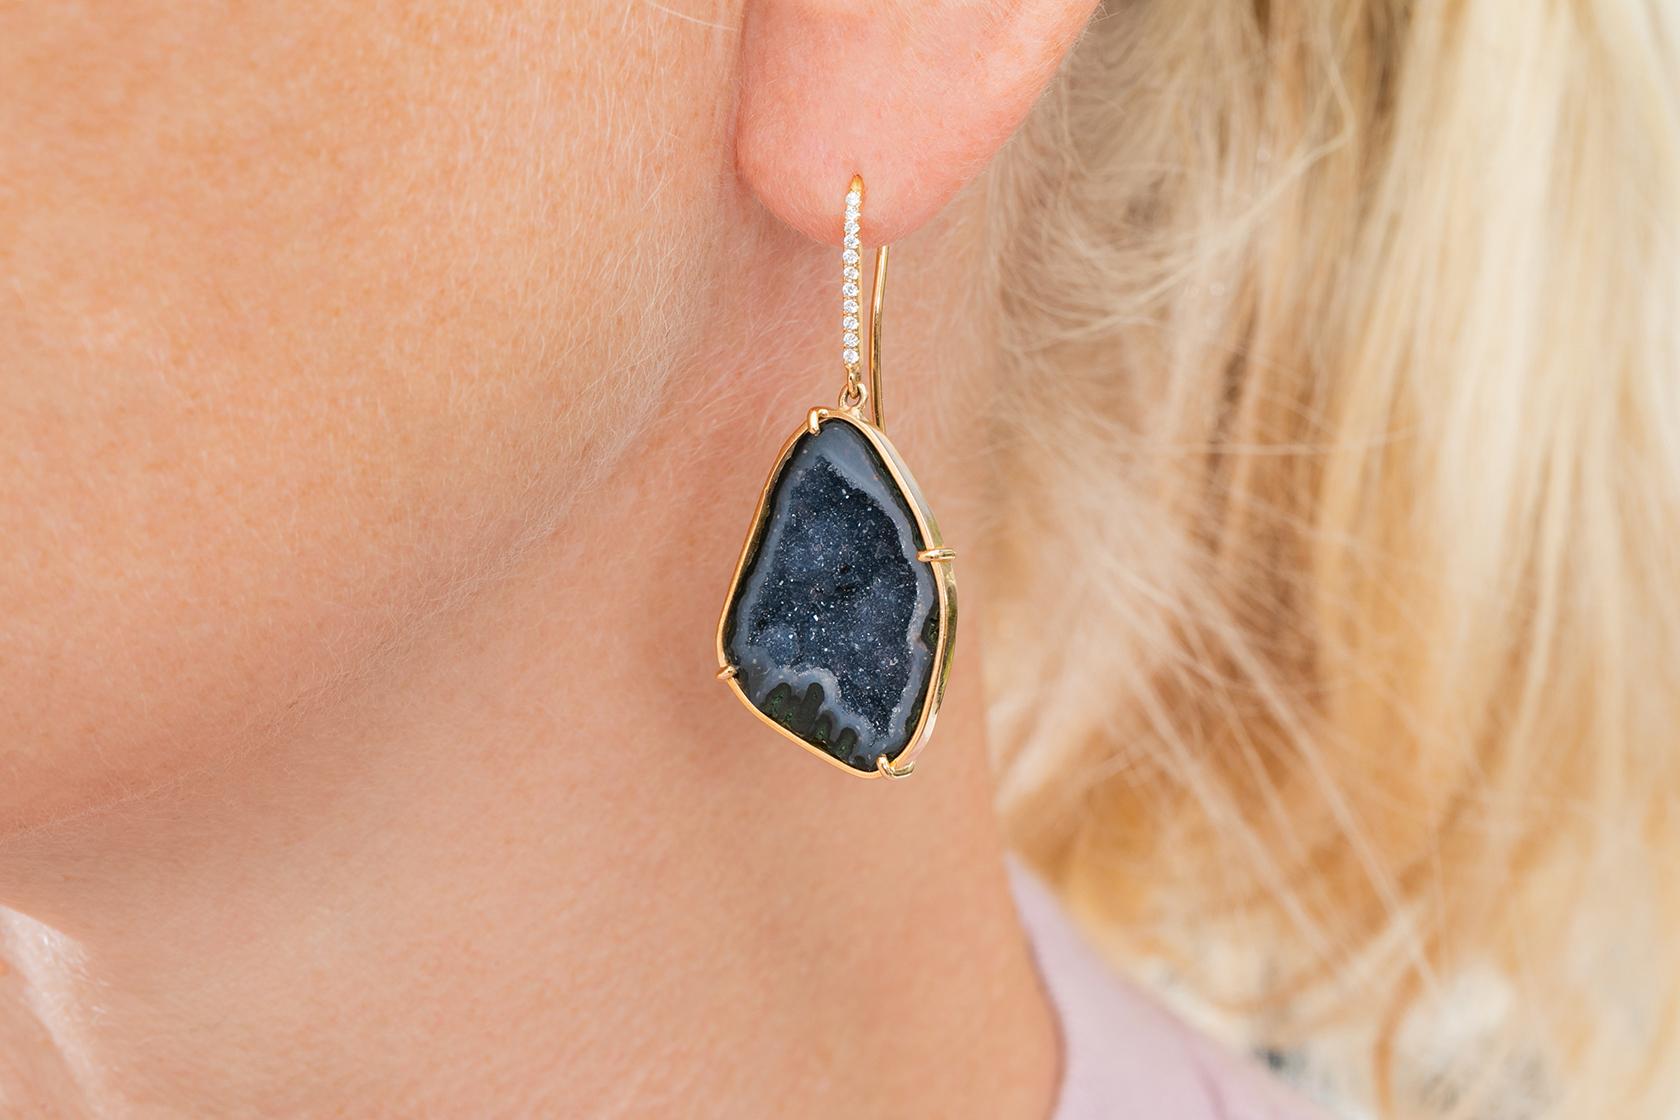 Karolin's Alison earrings are made of 18 ct rose gold with sparkling diamonds on the hook.
The color of the agate geode is midnight blue!
Wear it for dinner dates or with a pair of blue jeans!